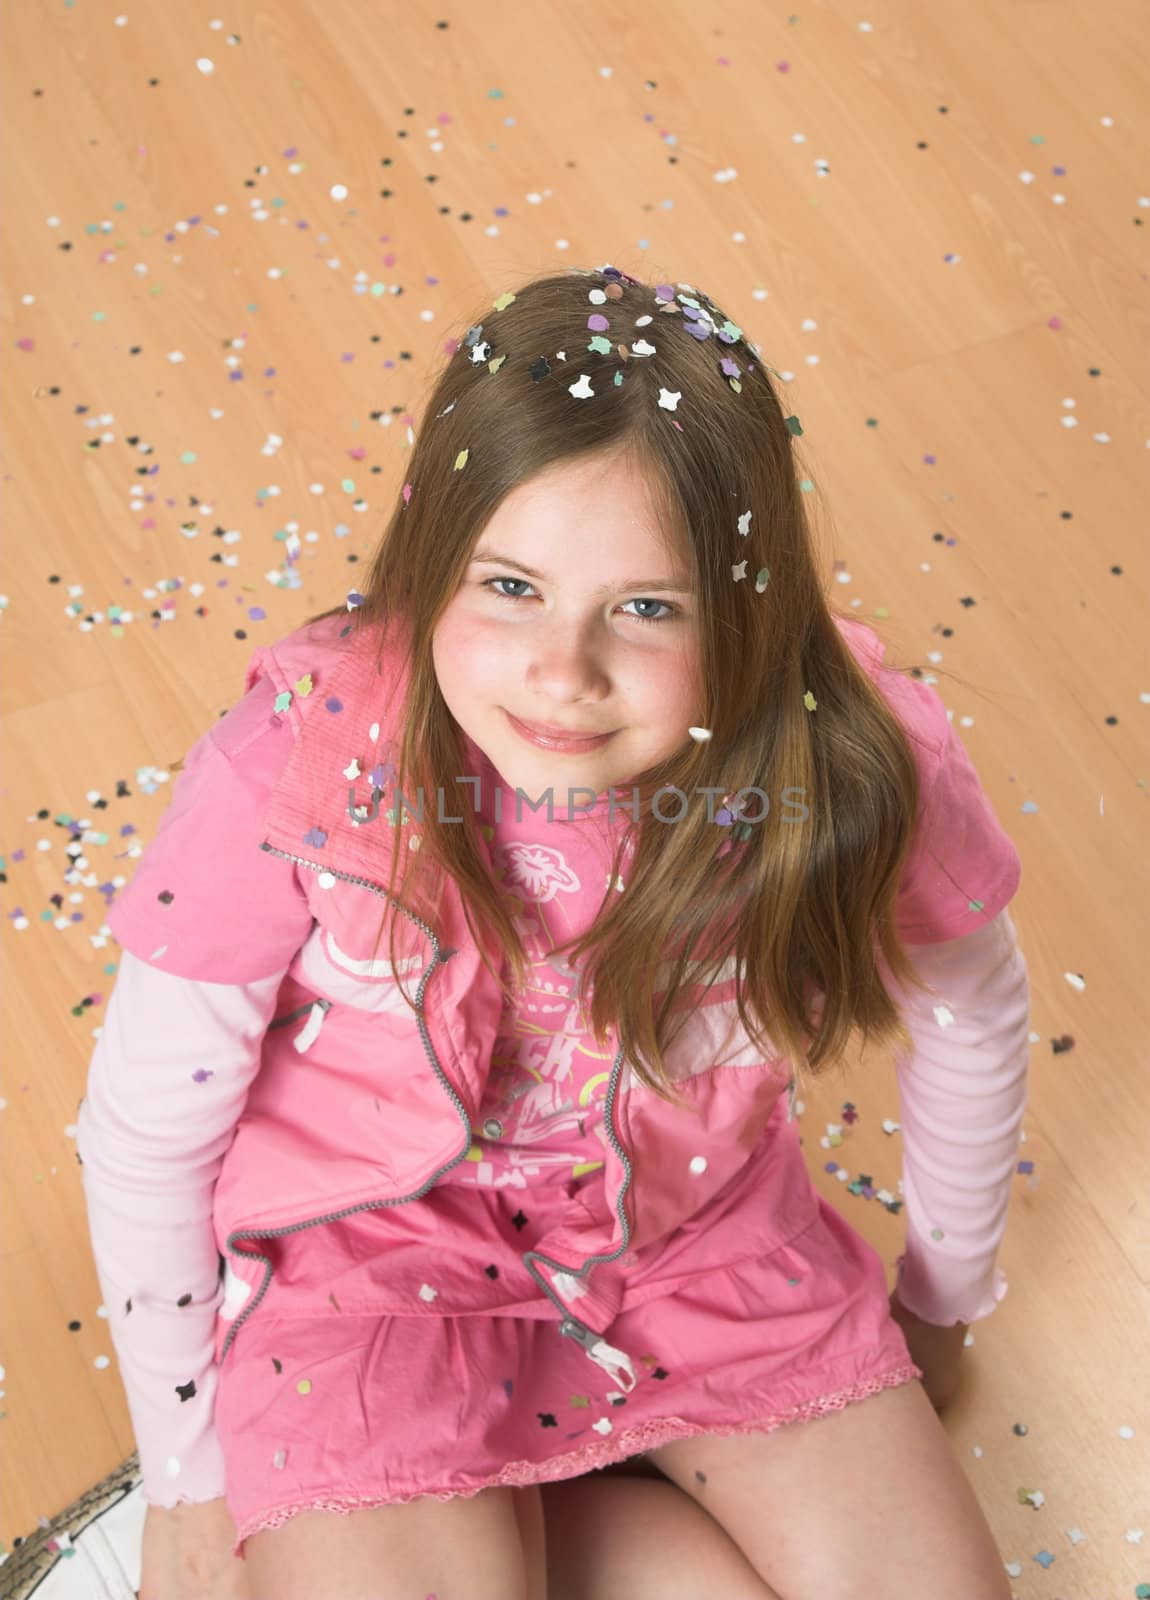 Little blond girl sitting on the floor covered in confetti